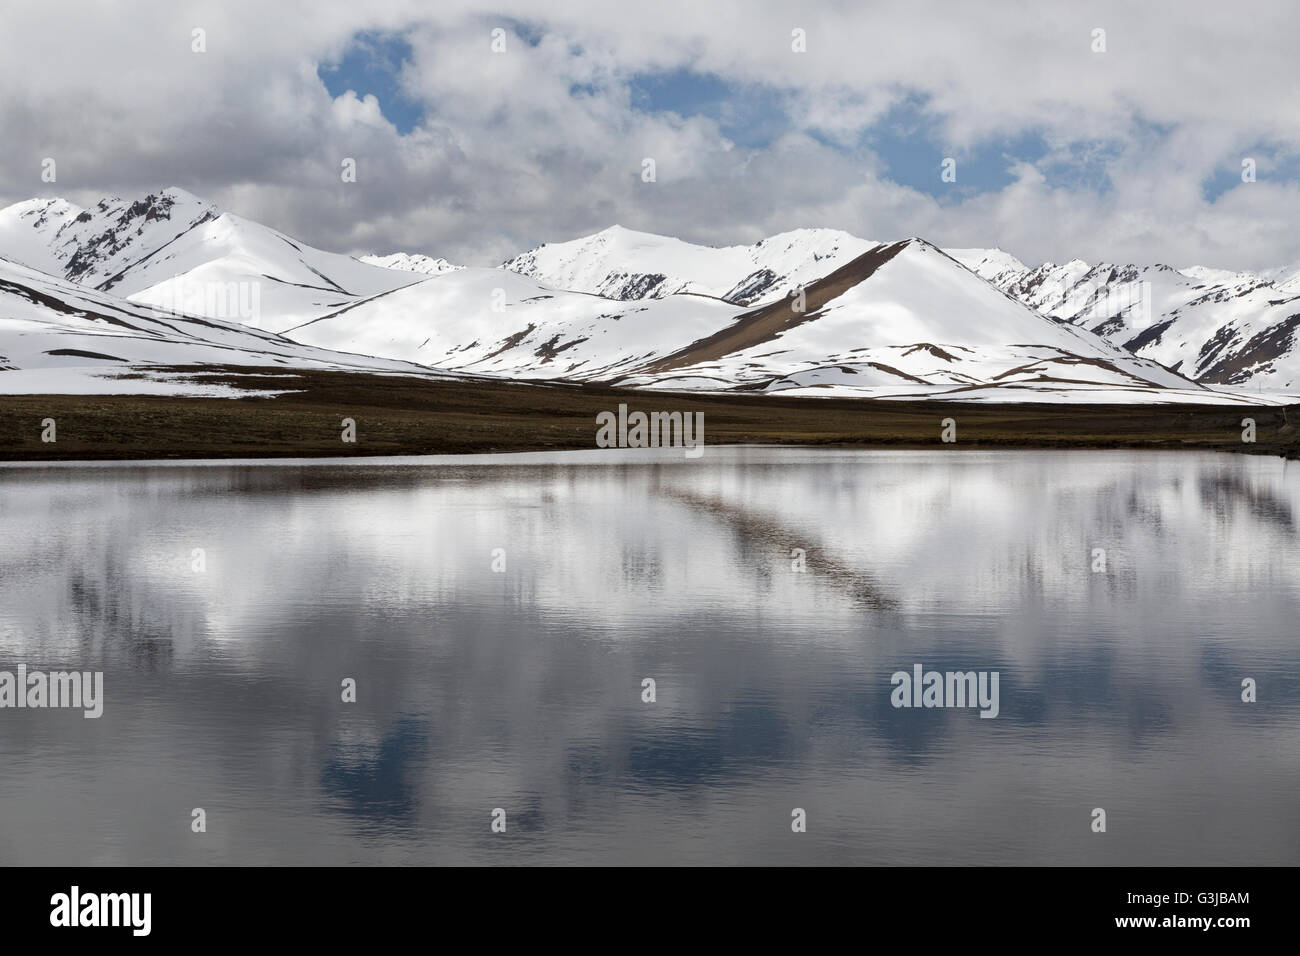 Mountain Lake and reflections in the water, Kyrgyzstan. Stock Photo